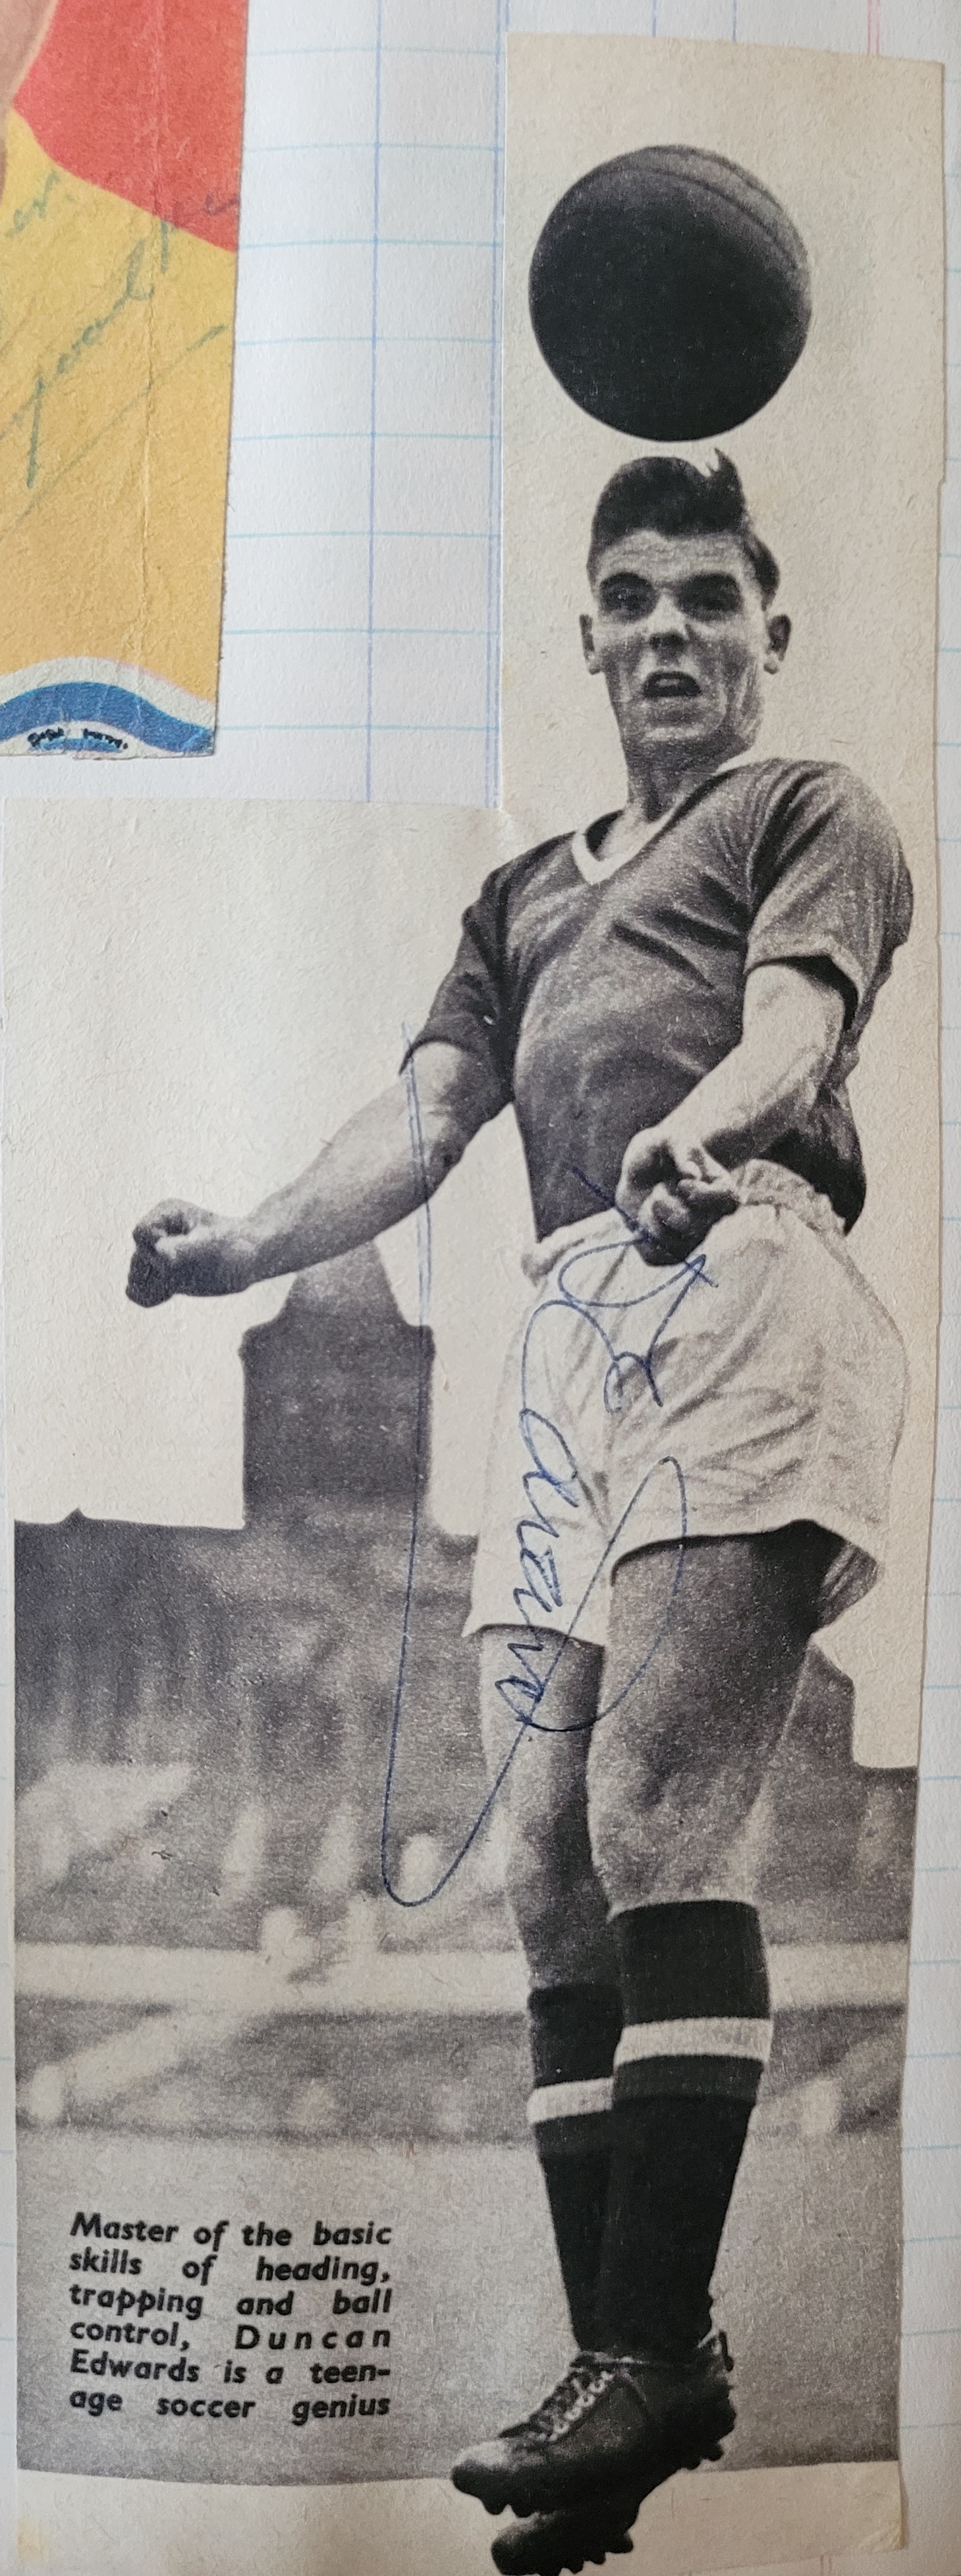 BOOK CONTAINING OVER 1,300 AUTOGRAPHED PICTURES INC' 4 OF MANCHESTER UNITED'S DUNCAN EDWARDS - Image 3 of 160